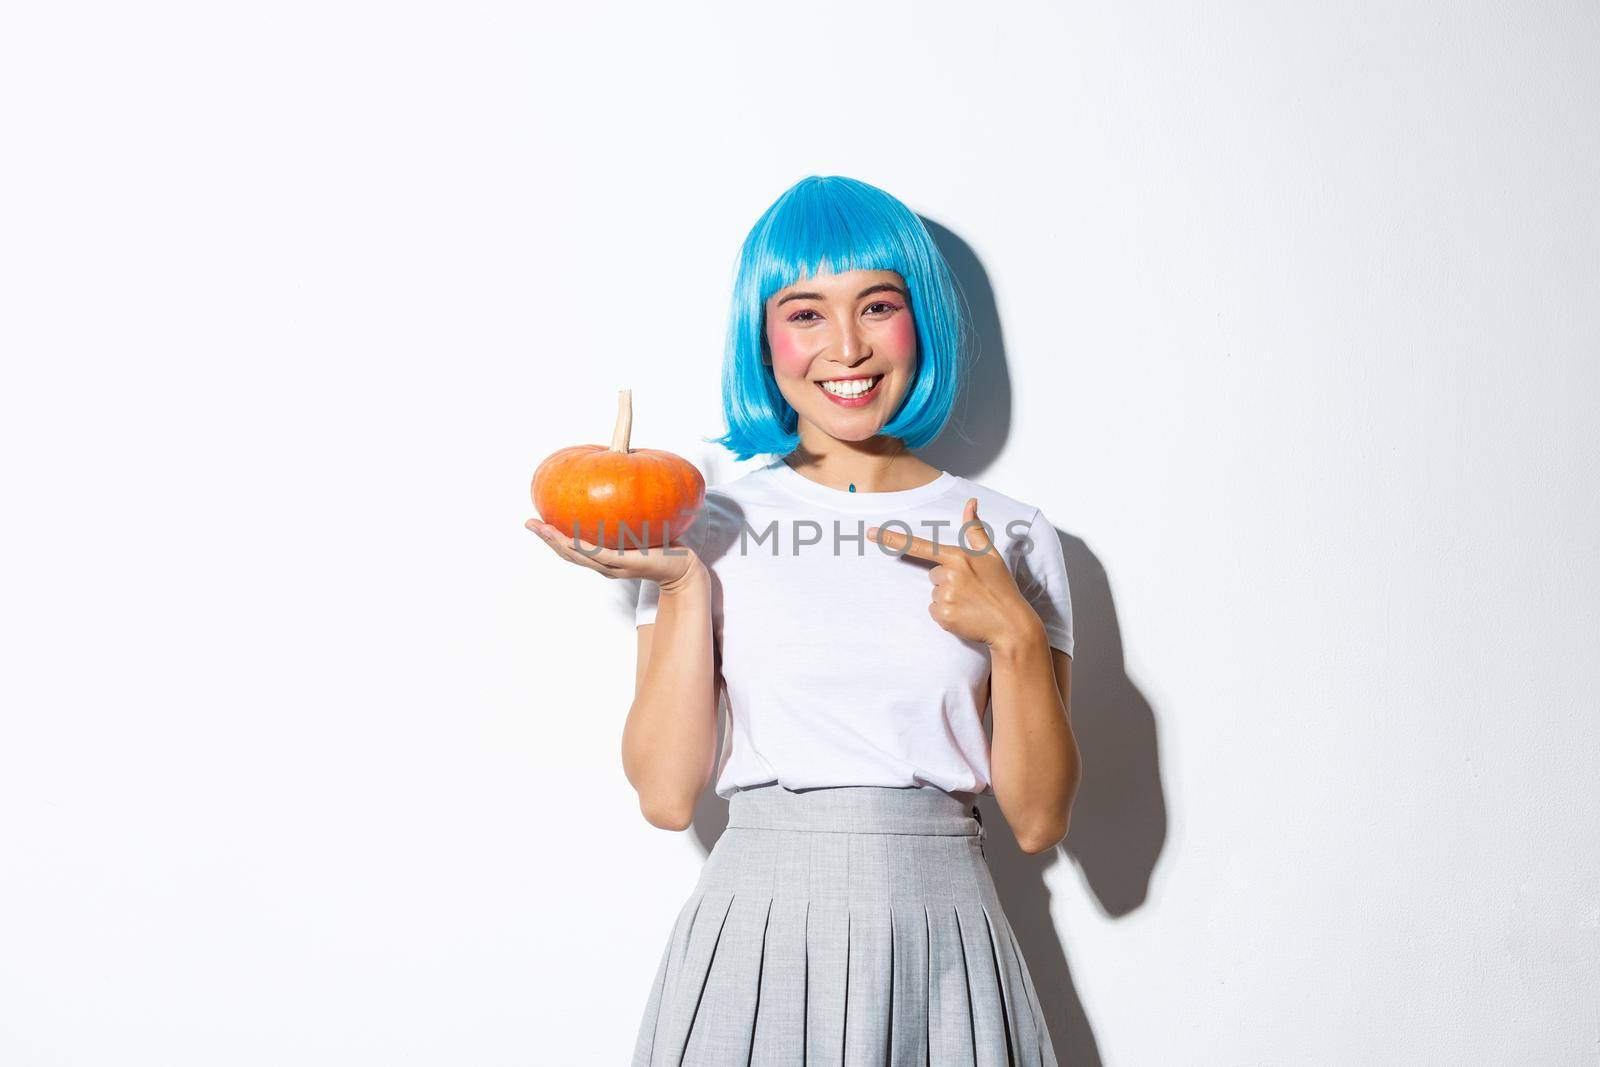 Cute smiling asian woman in blue wig pointing finger at small pumpkin, celebrating halloween, standing over white background.